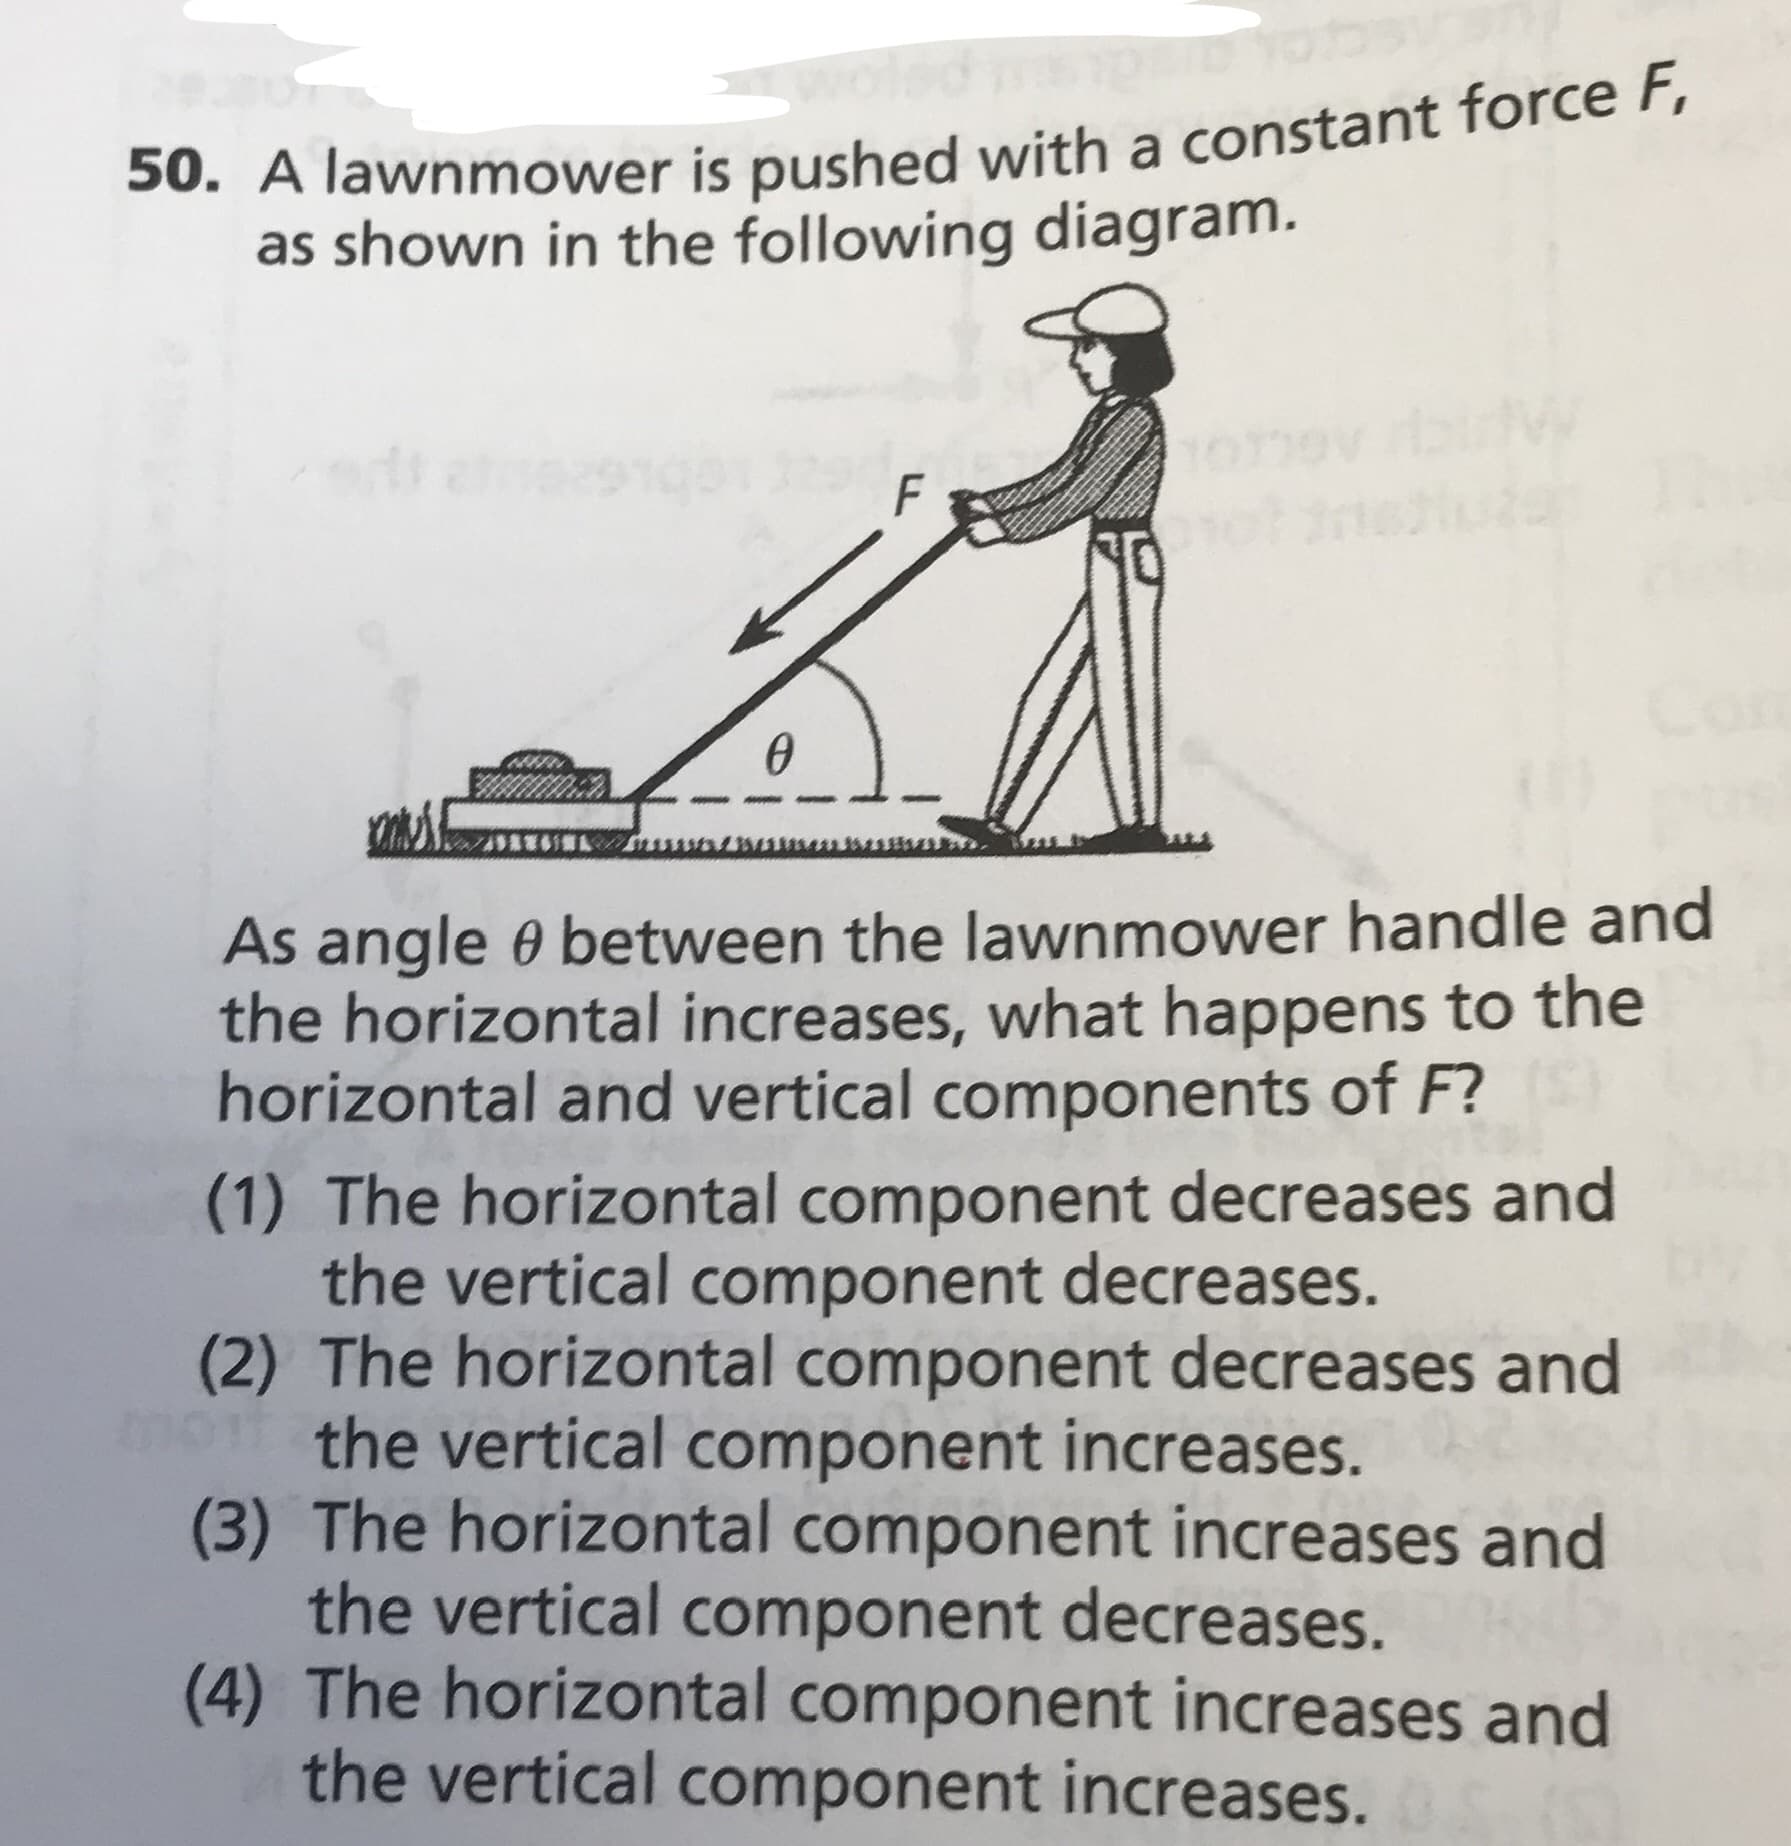 50. A lawnmower is pushed with a constant force F,
shown in the following diagram.
F
As angle e between the lawn mower hand le and
the horizontal increases, what happens to the
horizontal and vertical components of F?
(1) The horizontal component decreases and
the vertical component decreases.
(2) The horizontal component decreases and
the vertical component increases.
(3) The horizontal component increases and
the vertical component decreases.
(4) The horizontal component increases and
the vertical component increases.
